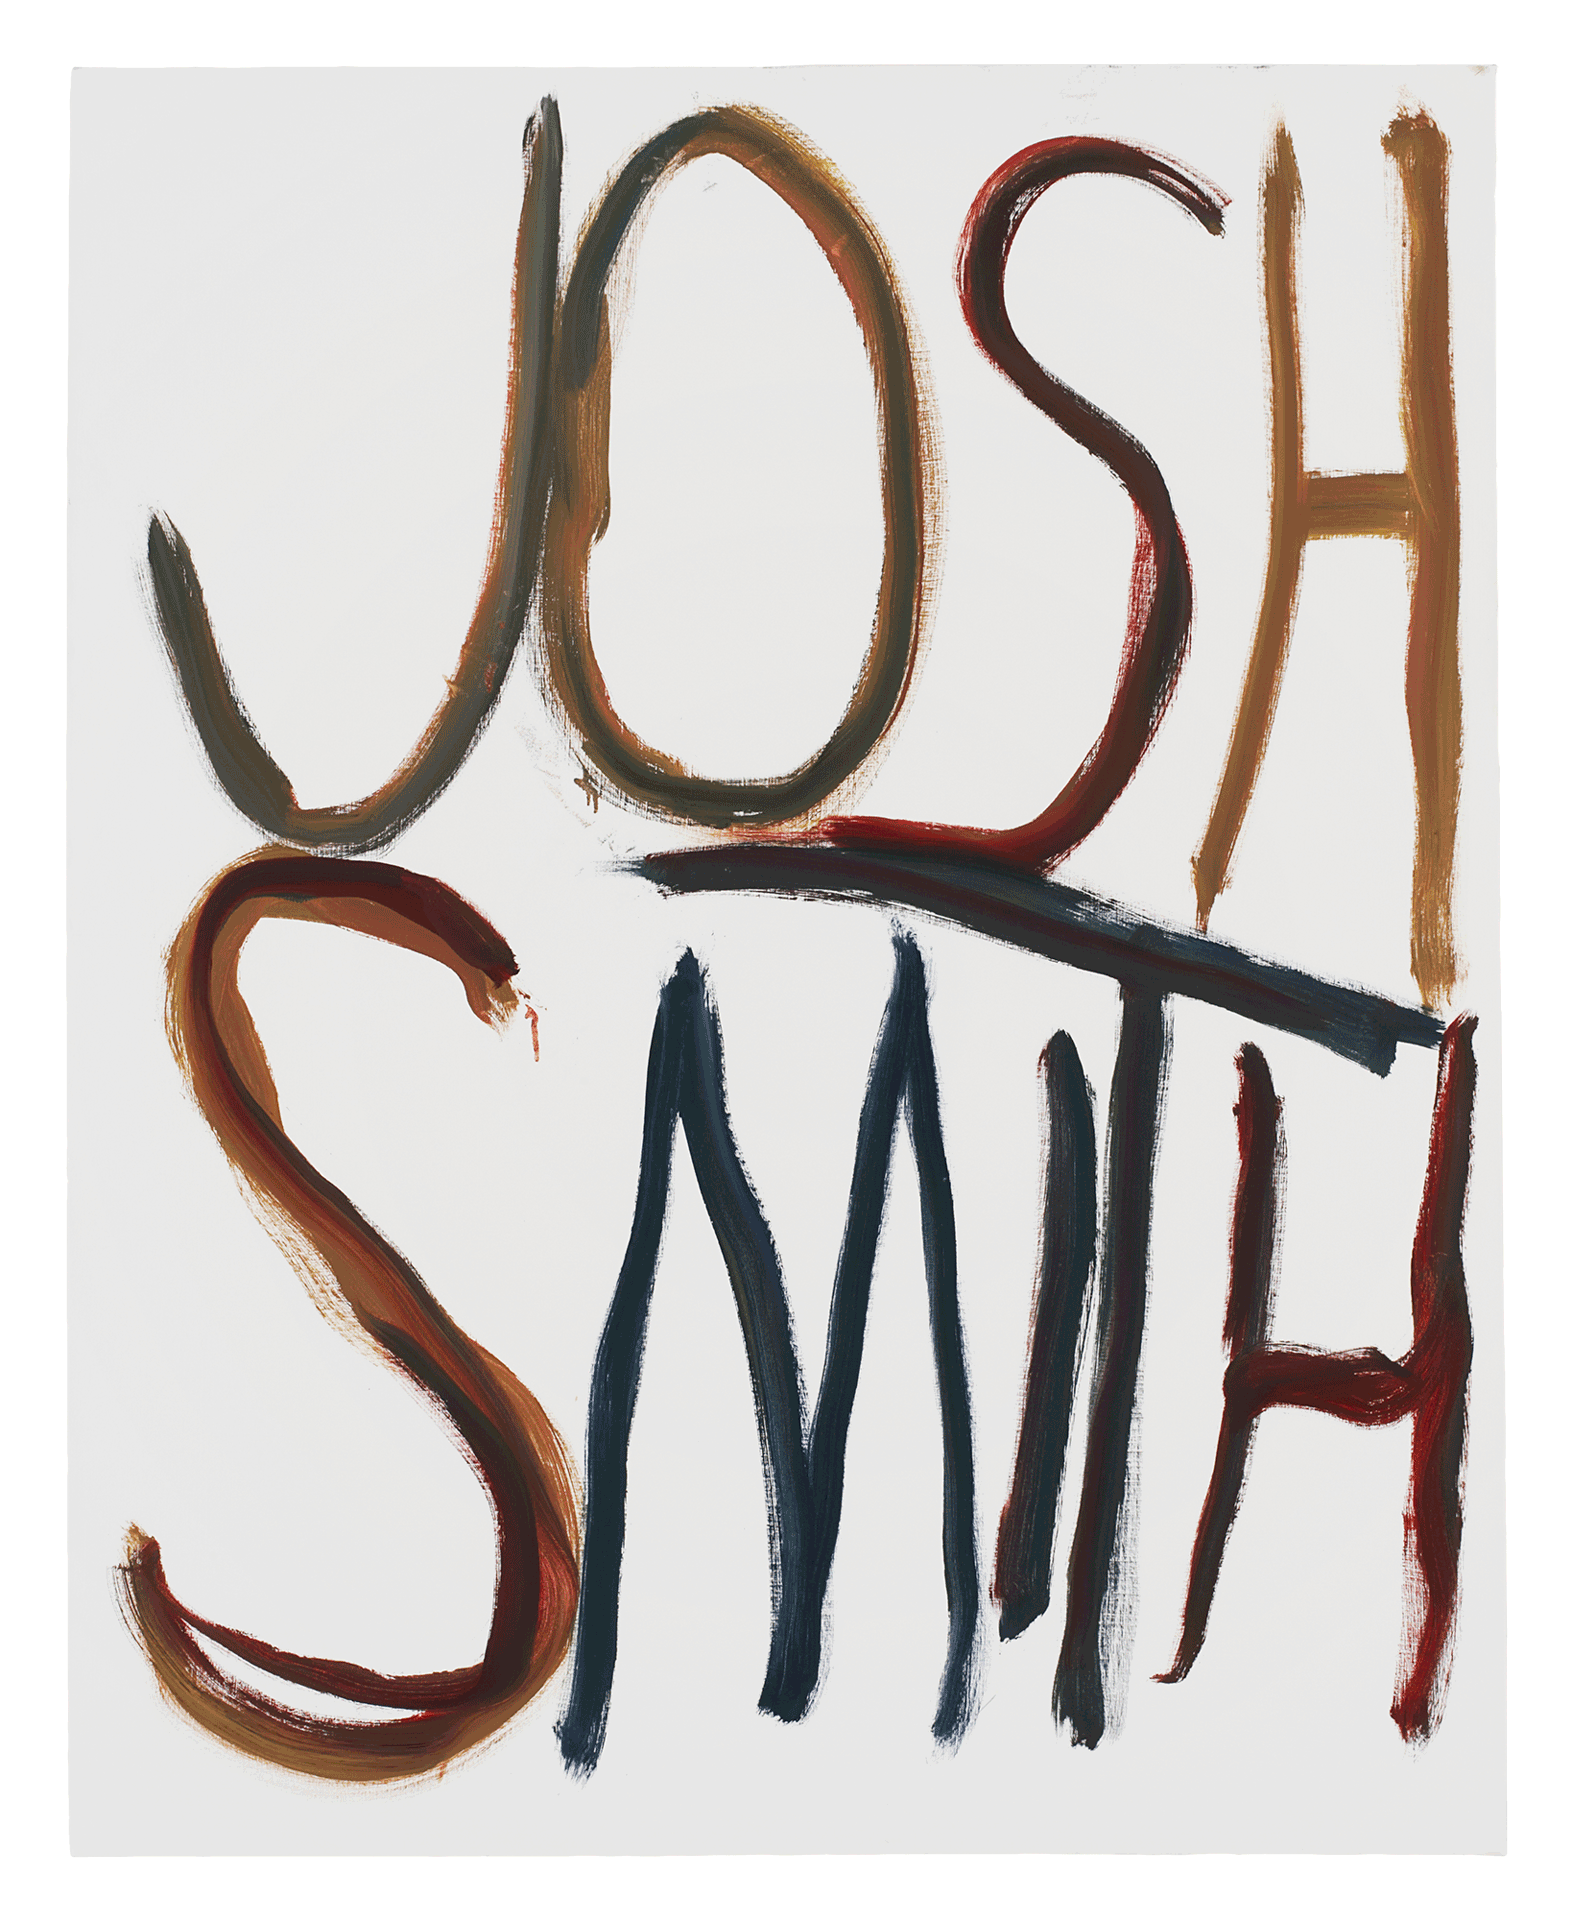 An untitled painting by Josh Smith, dated 2007.